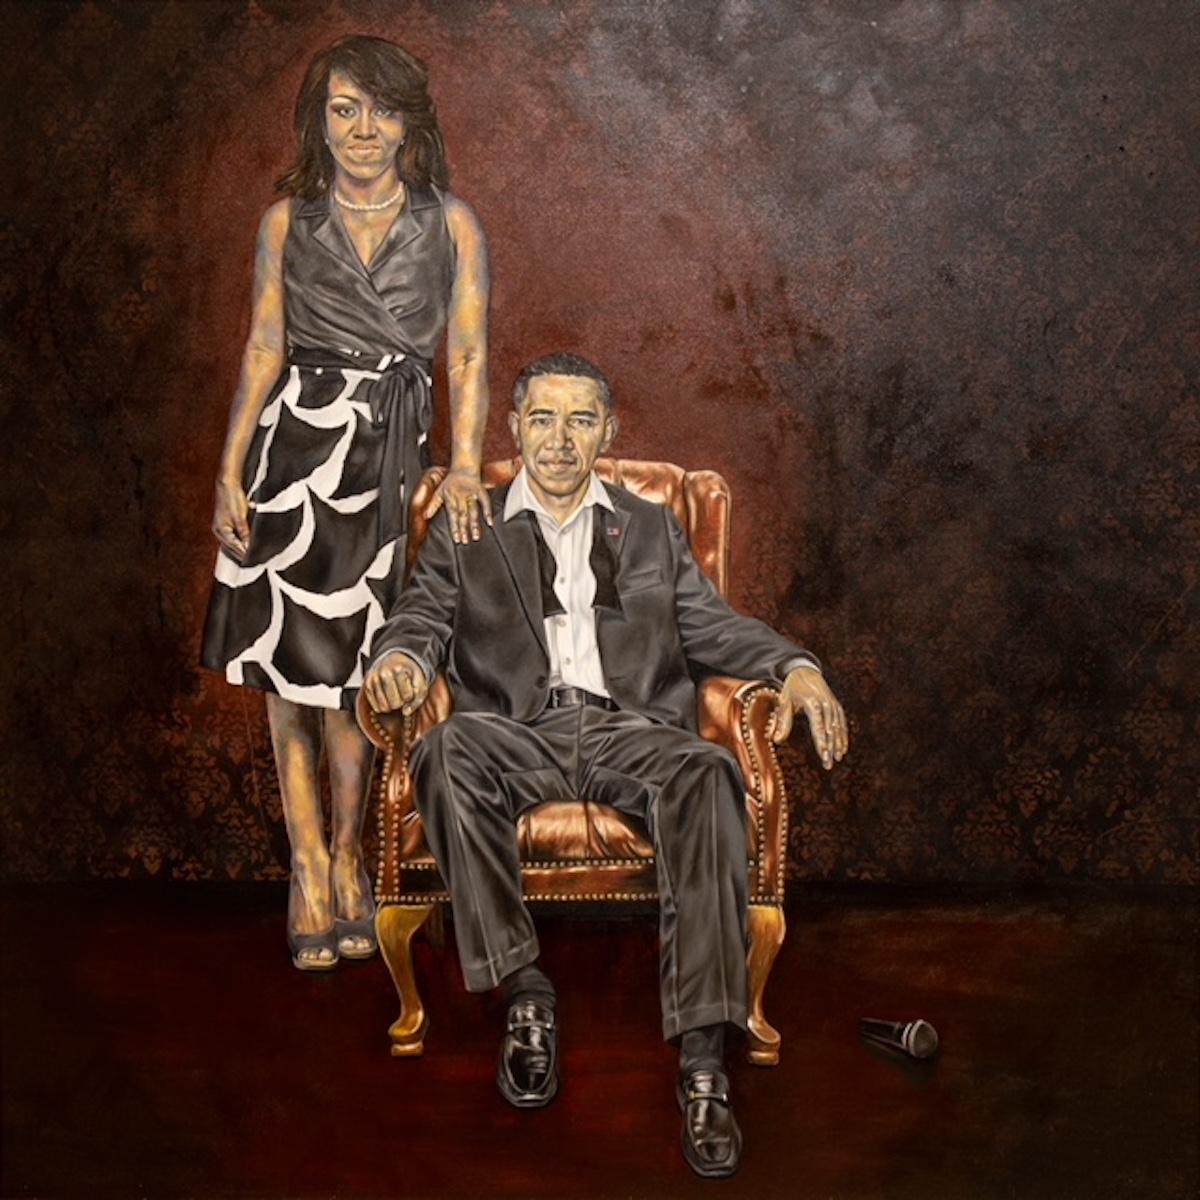 Robert Peterson Portrait Painting - My President is, Michelle & Barack Obama